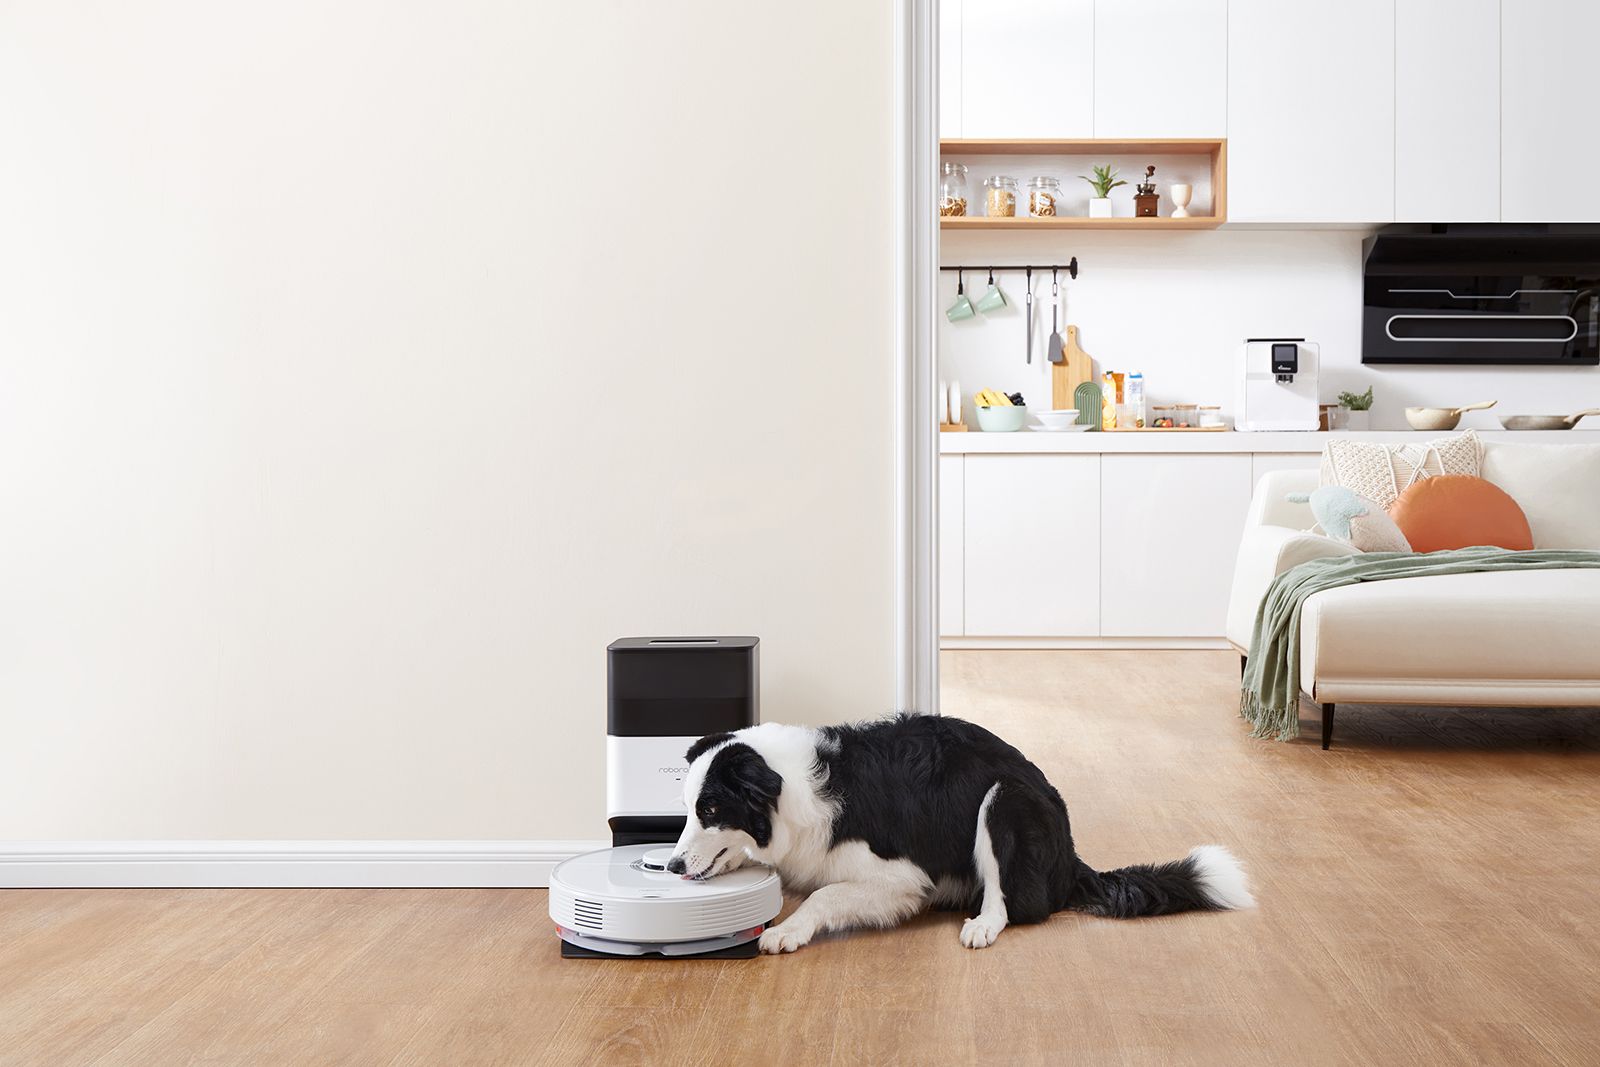 The Roborock Q7 Max + vacuum sits on its dock next to a black and white dog